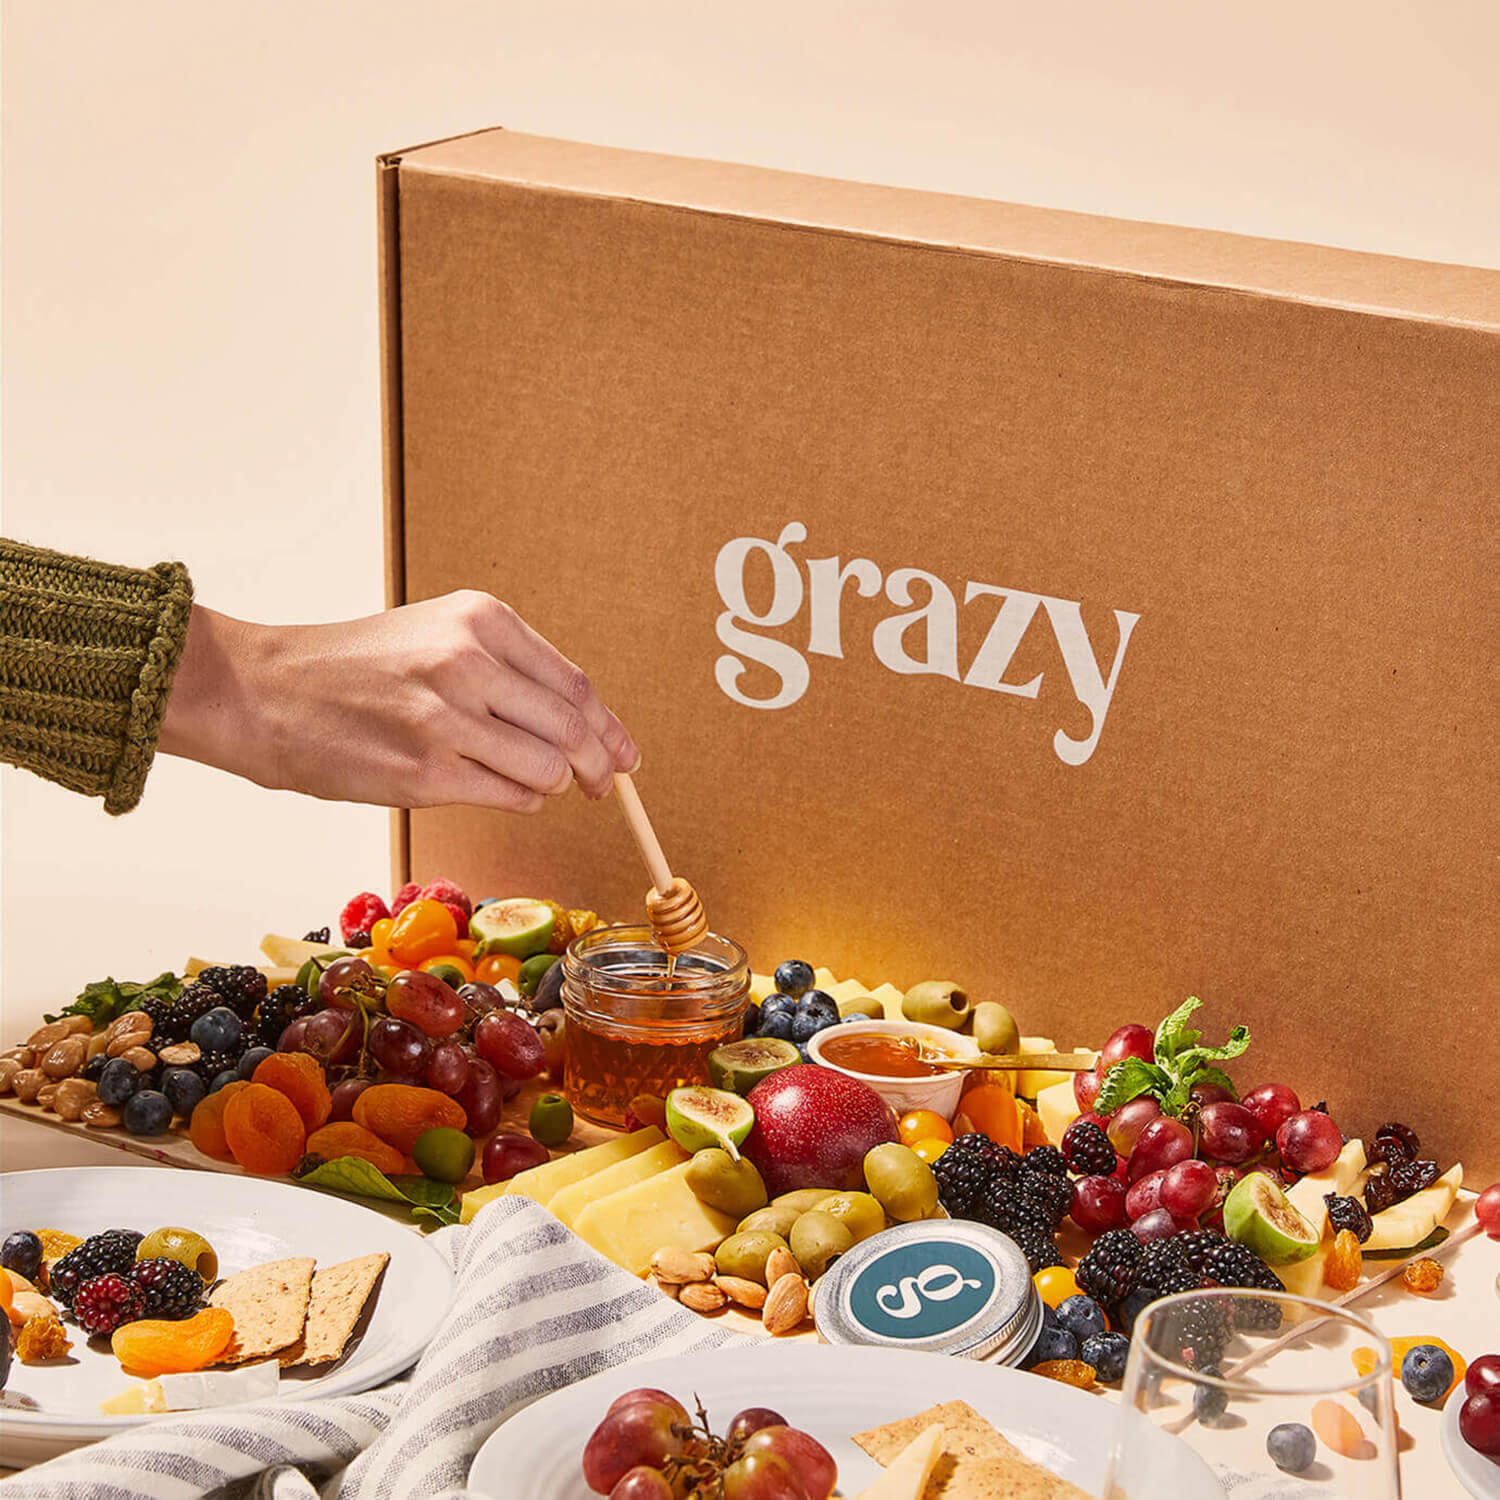 Angled view of a large Grazy box containing cheeses and fruits